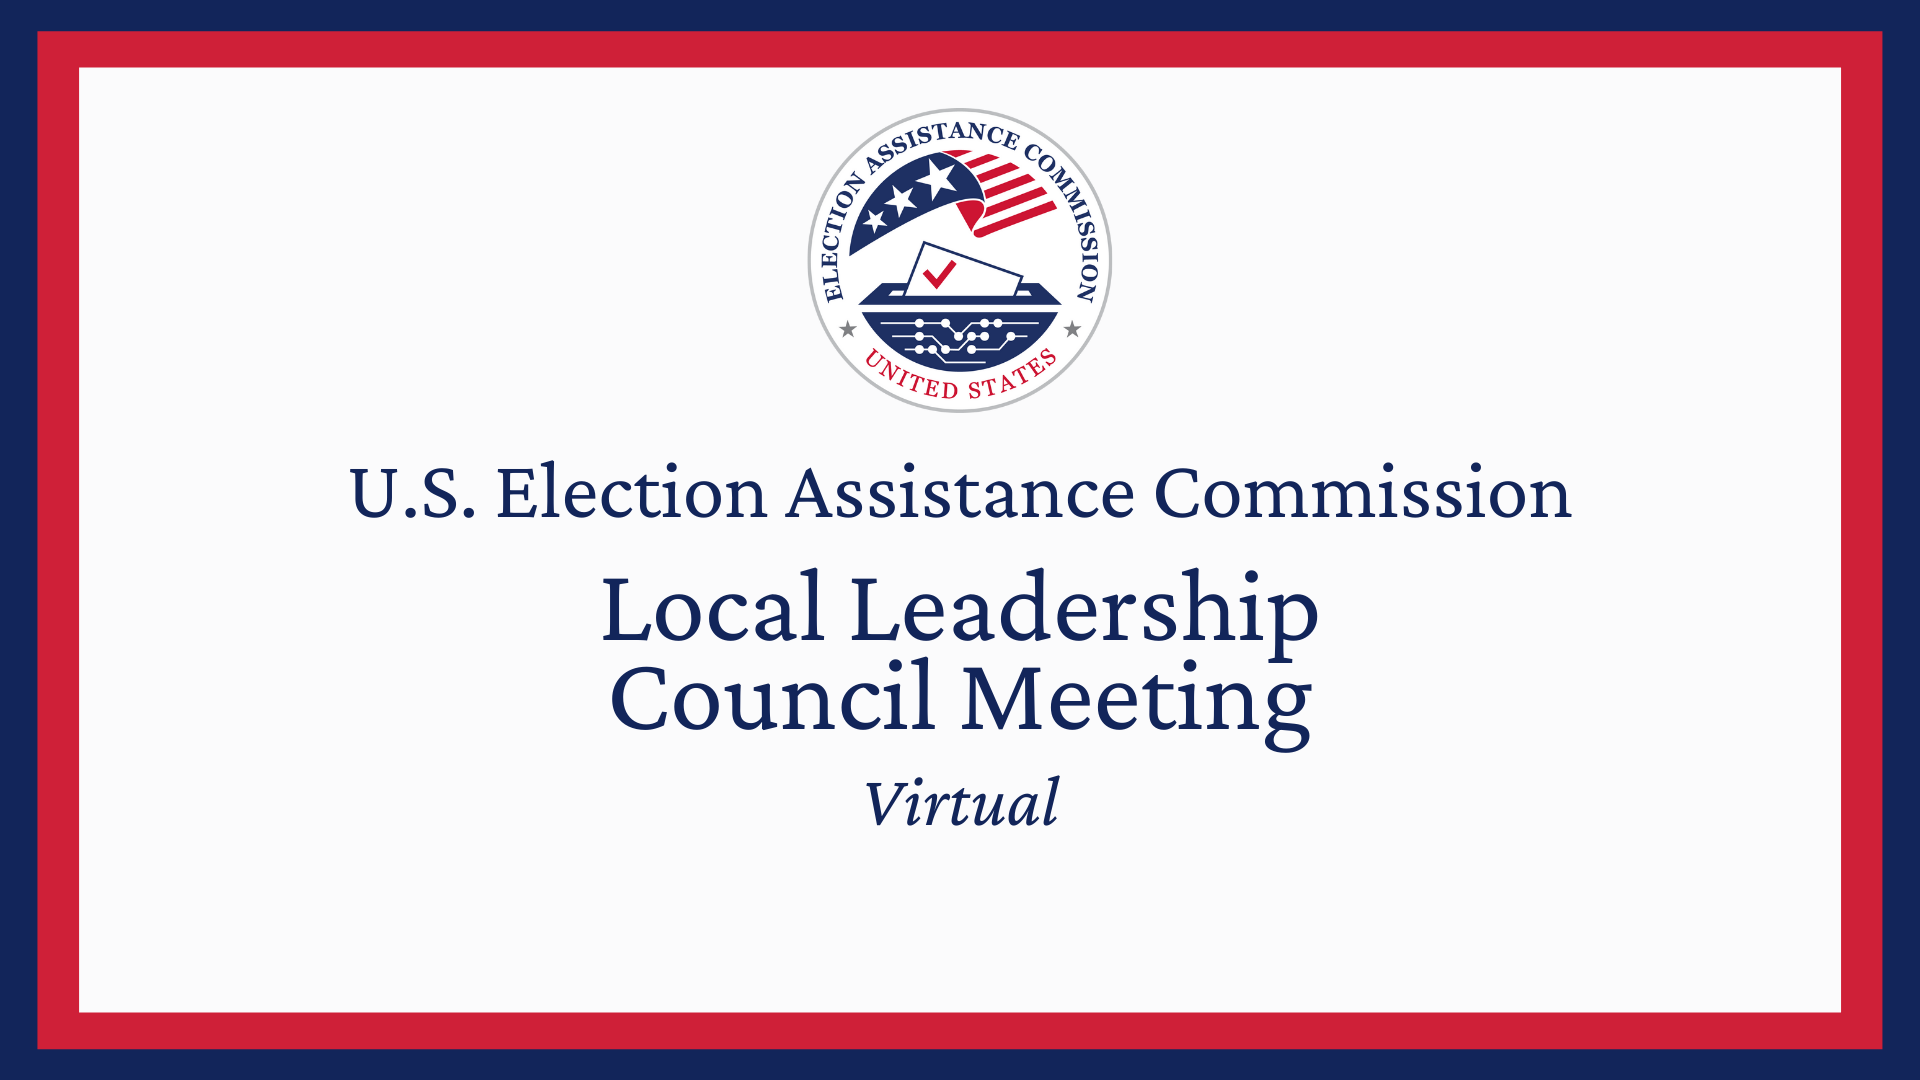 EAC seal with the text U.S. Election Assistance Commission, Local Leadership Council Meeting, Virtual